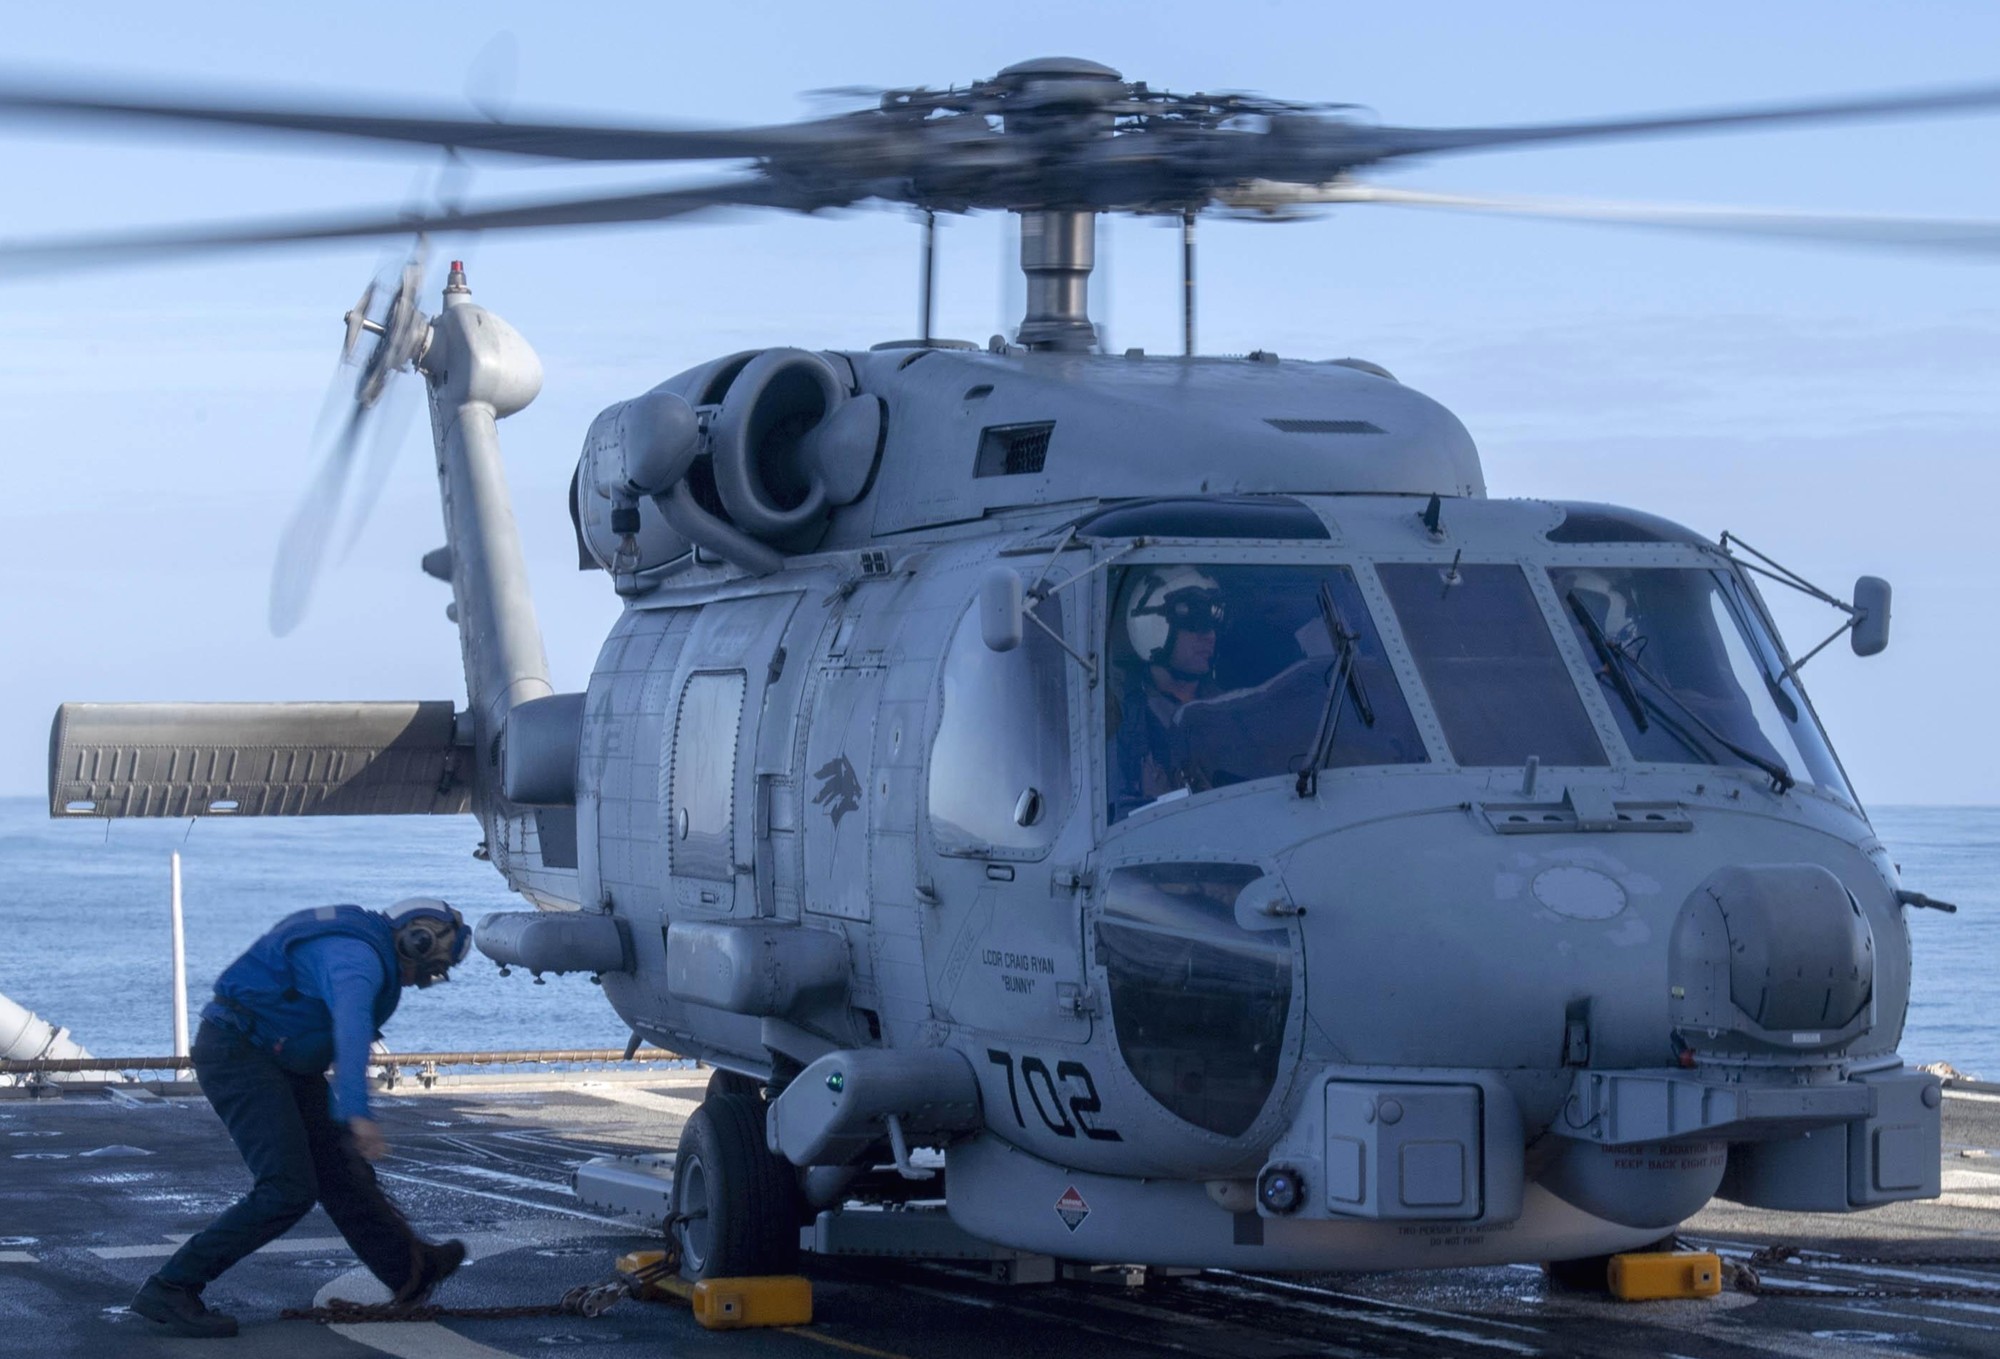 hsm-75 wolf pack helicopter maritime strike squadron mh-60r seahawk cg-52 uss bunker hill 35